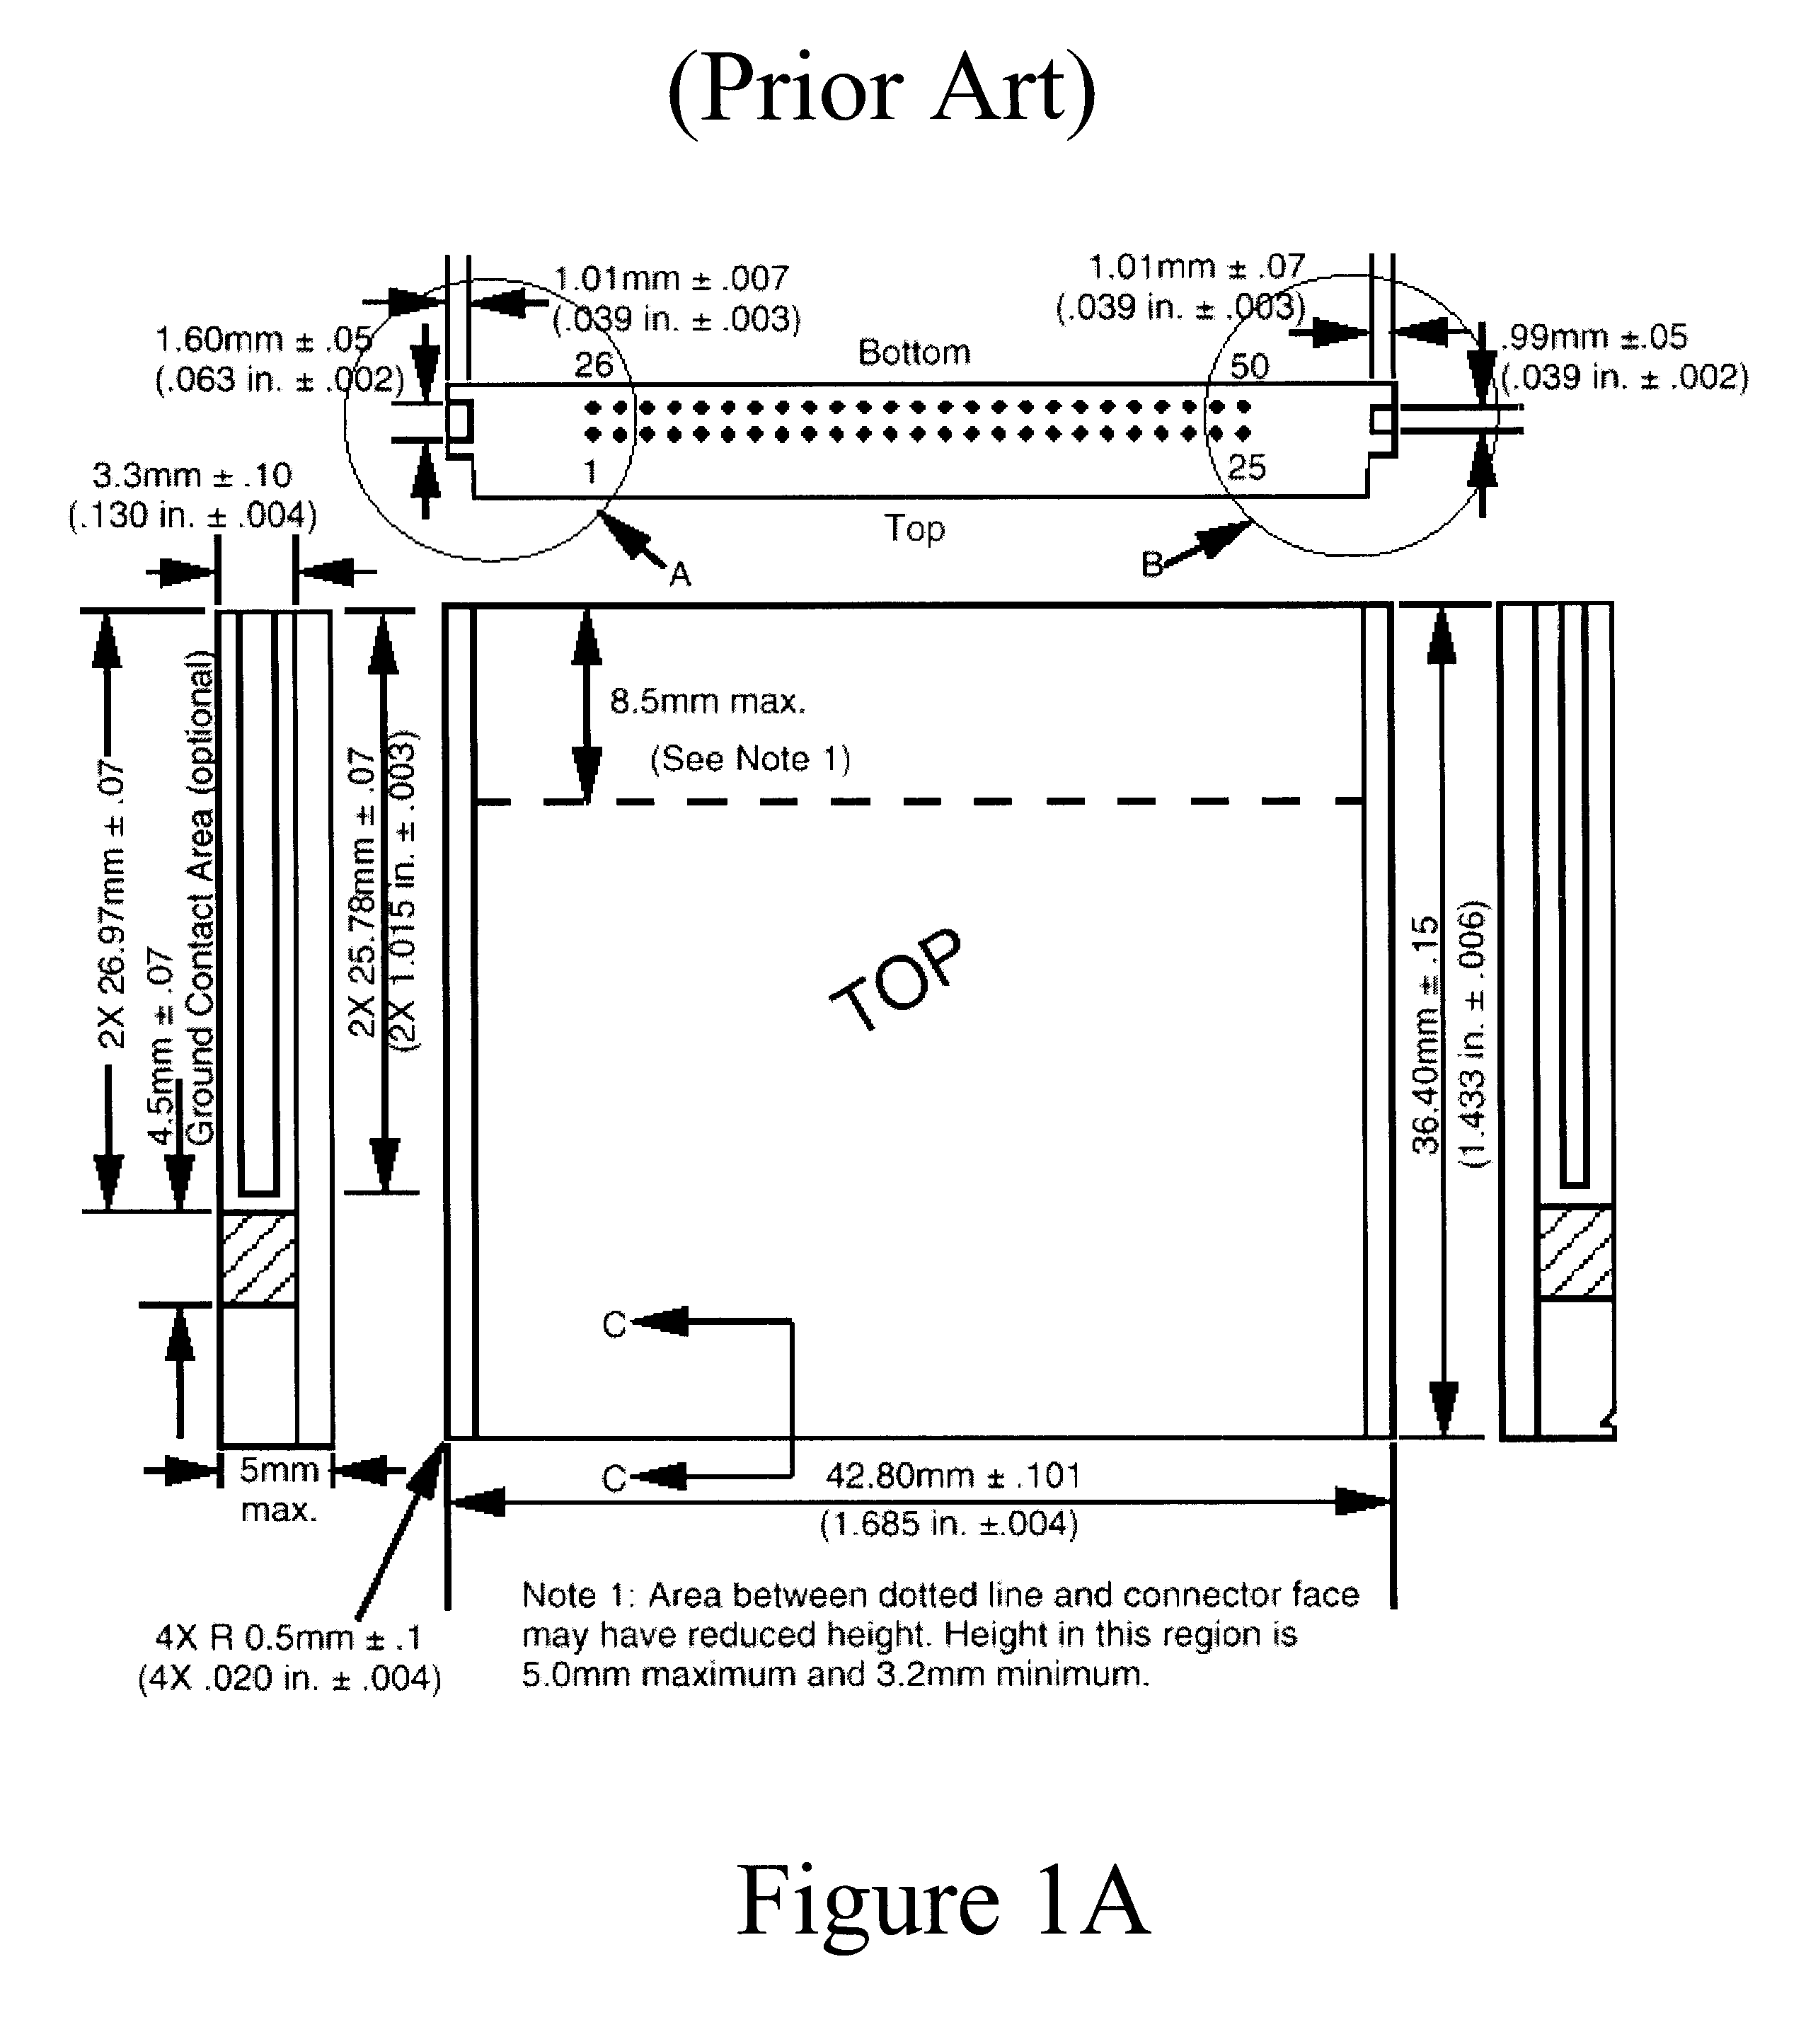 First-level removable module having bar code I/O and second-level removable memory